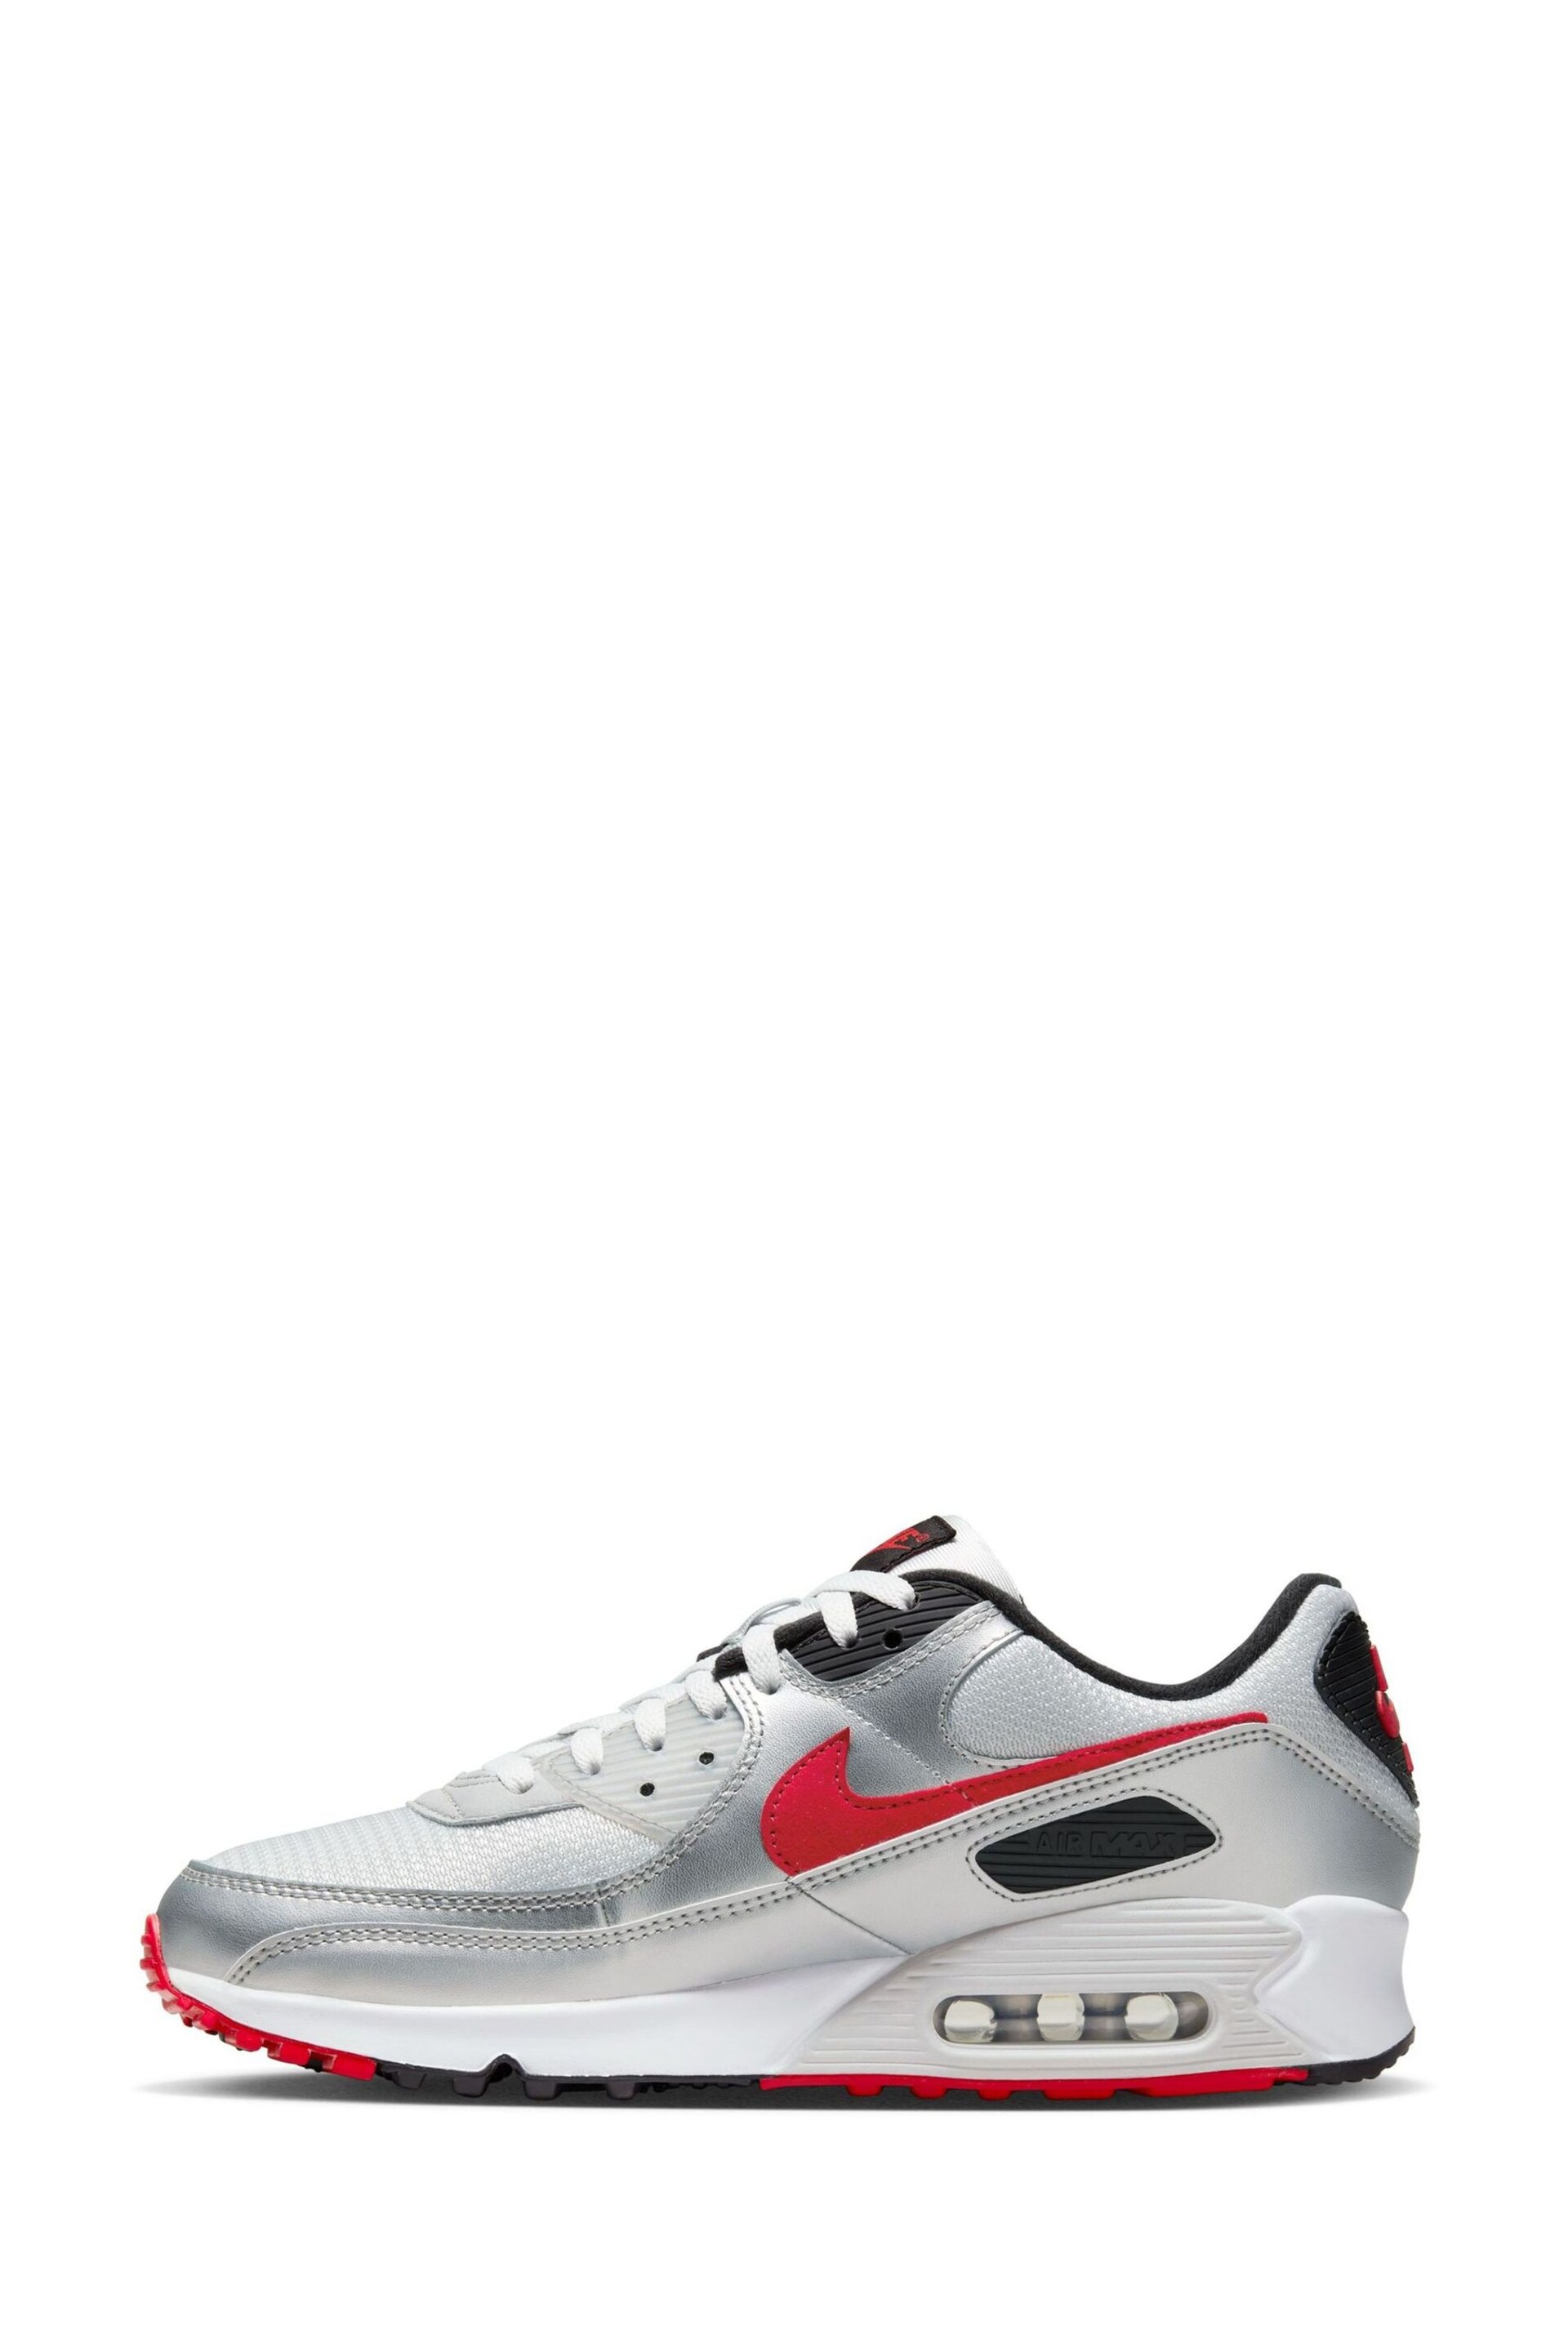 Nike Grey/Red Air Max 90 Trainers - Image 2 of 9